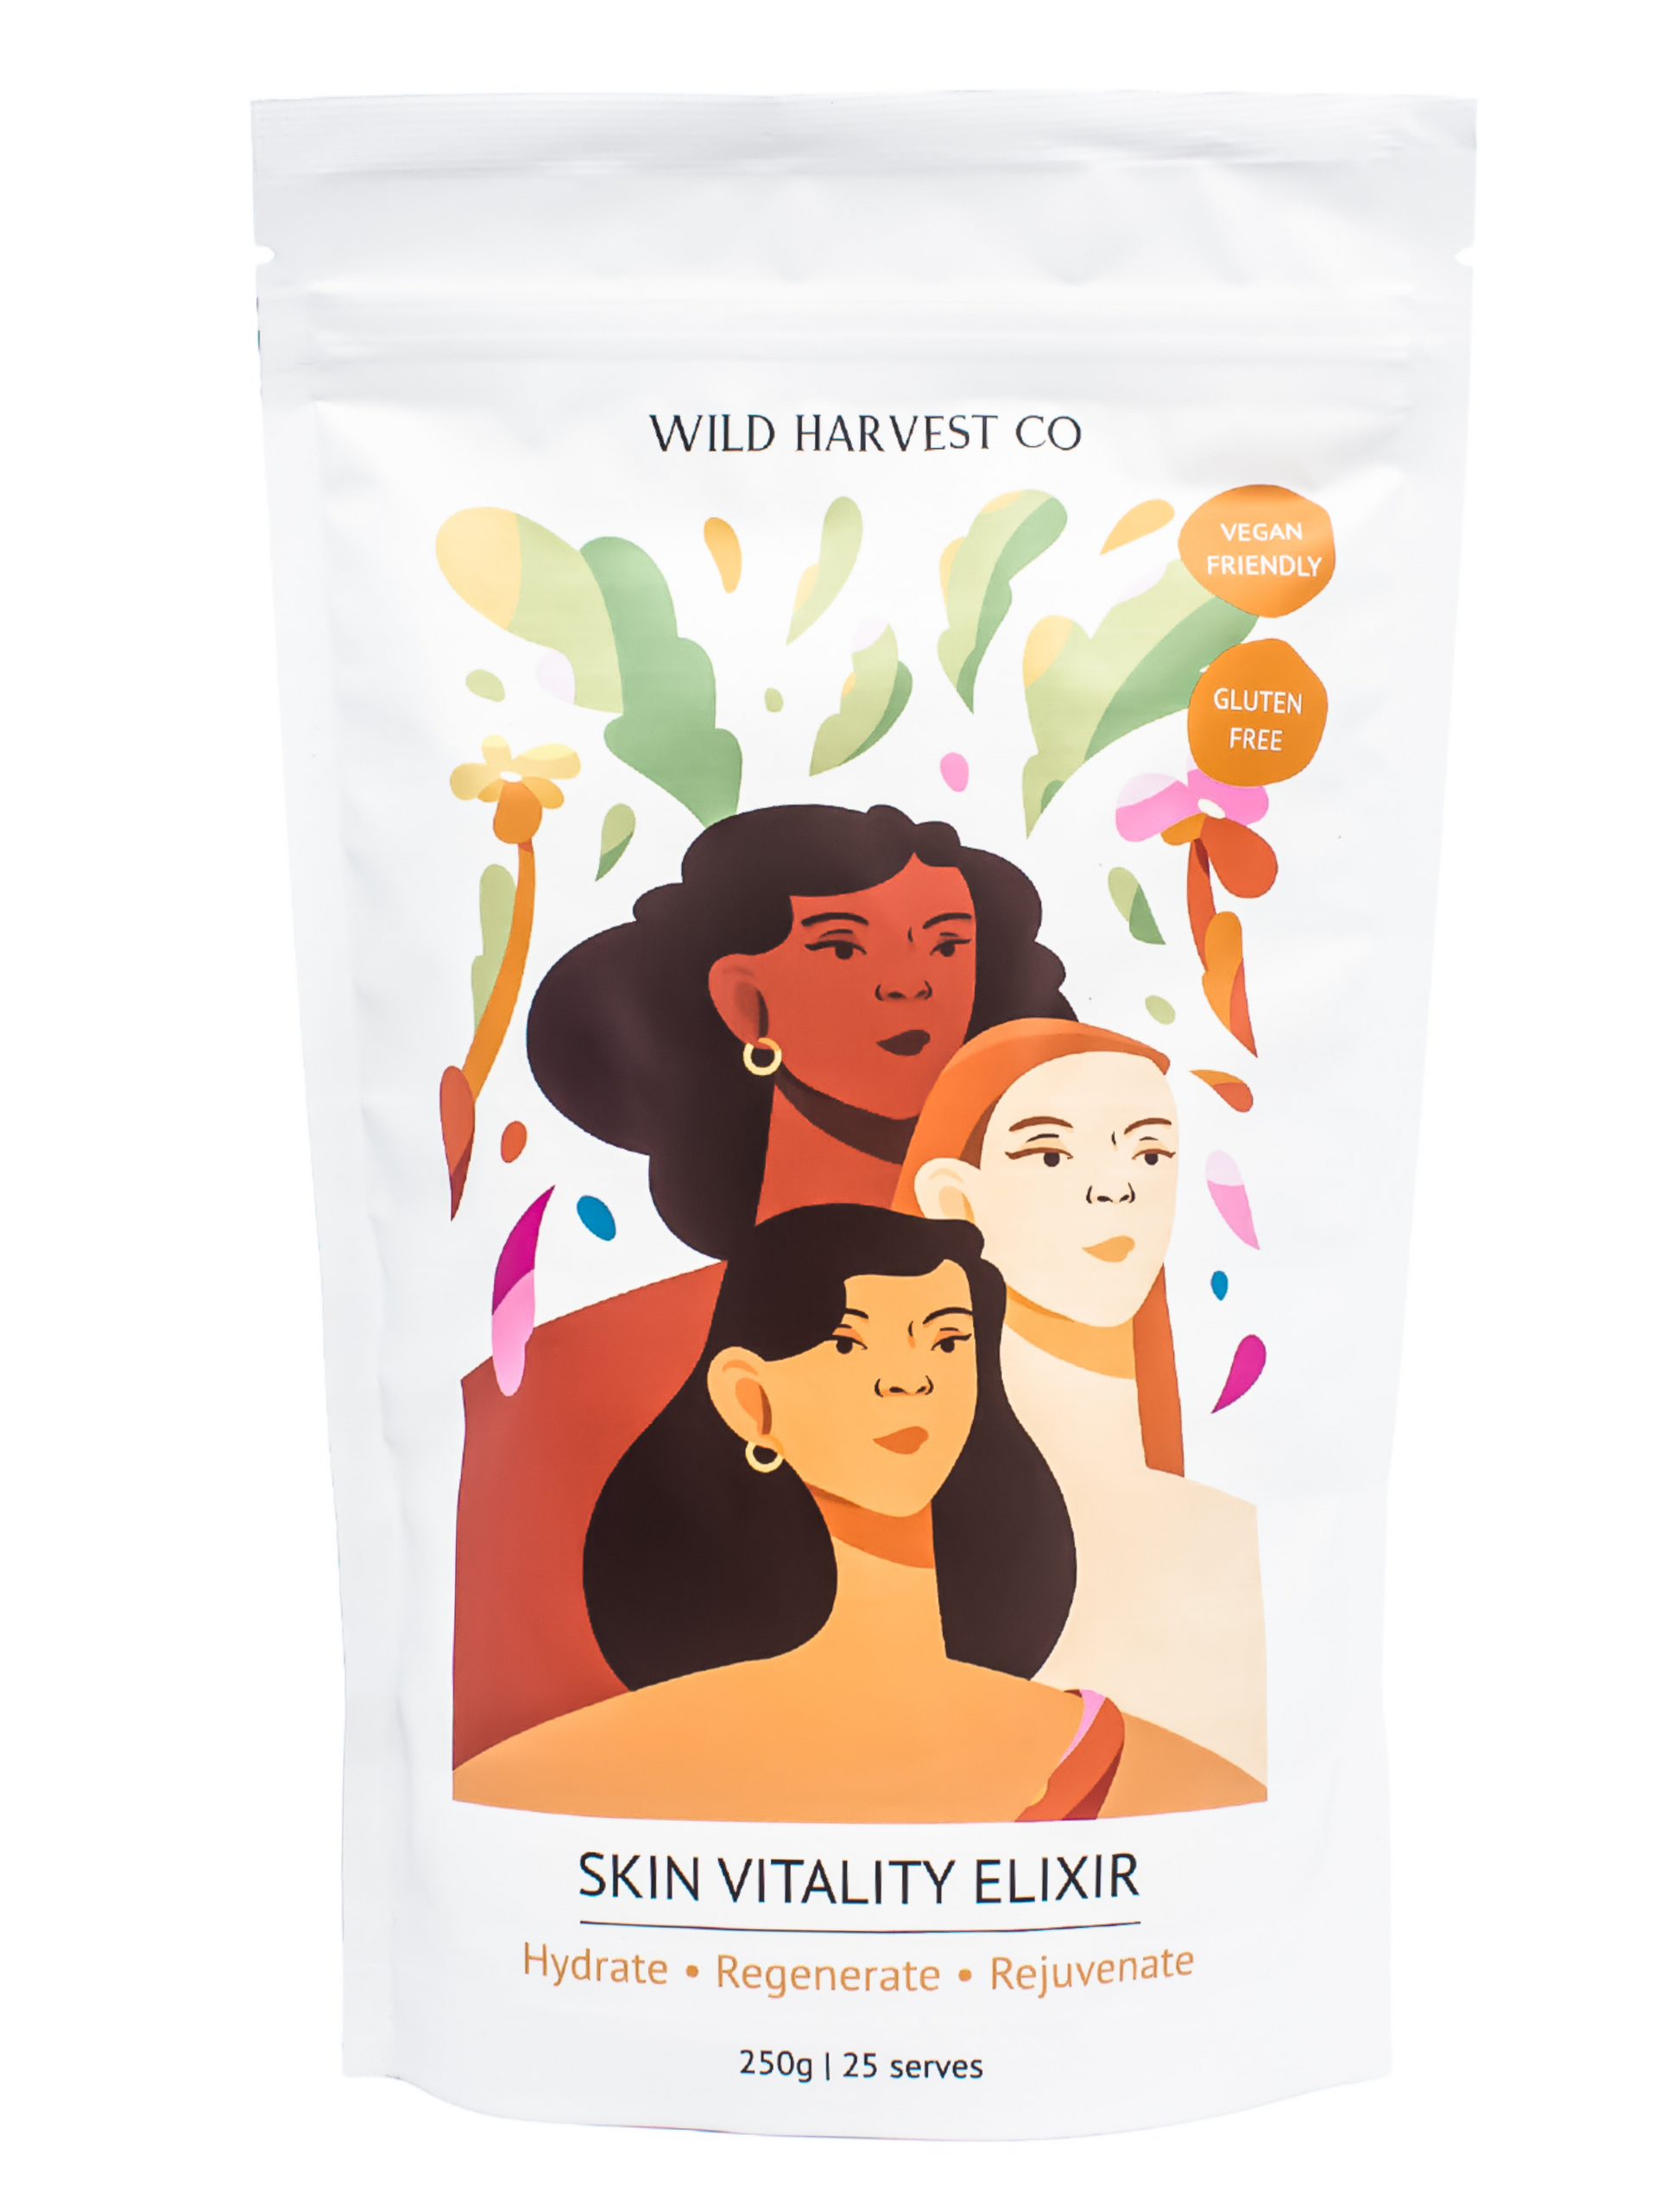 Wild Harvest Co Skin Vitality Elixir Pouch with three woman posing: a black woman with dark hair, a mulata with dark hair and a white woman with red hair